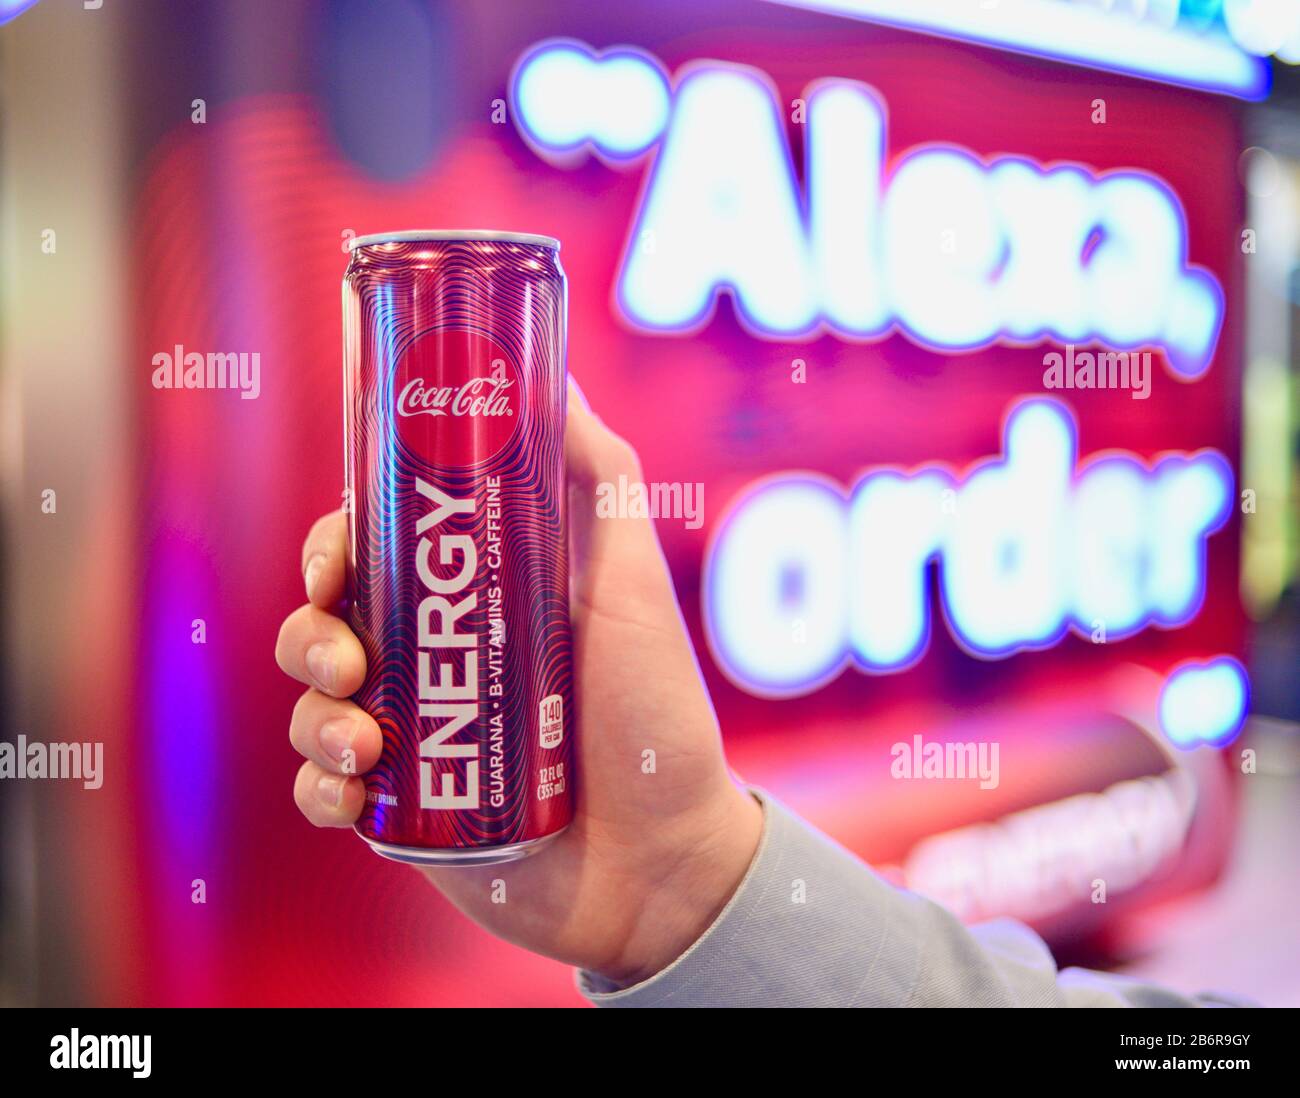 Coca Cola Energy Drink High Resolution Stock Photography and Images - Alamy